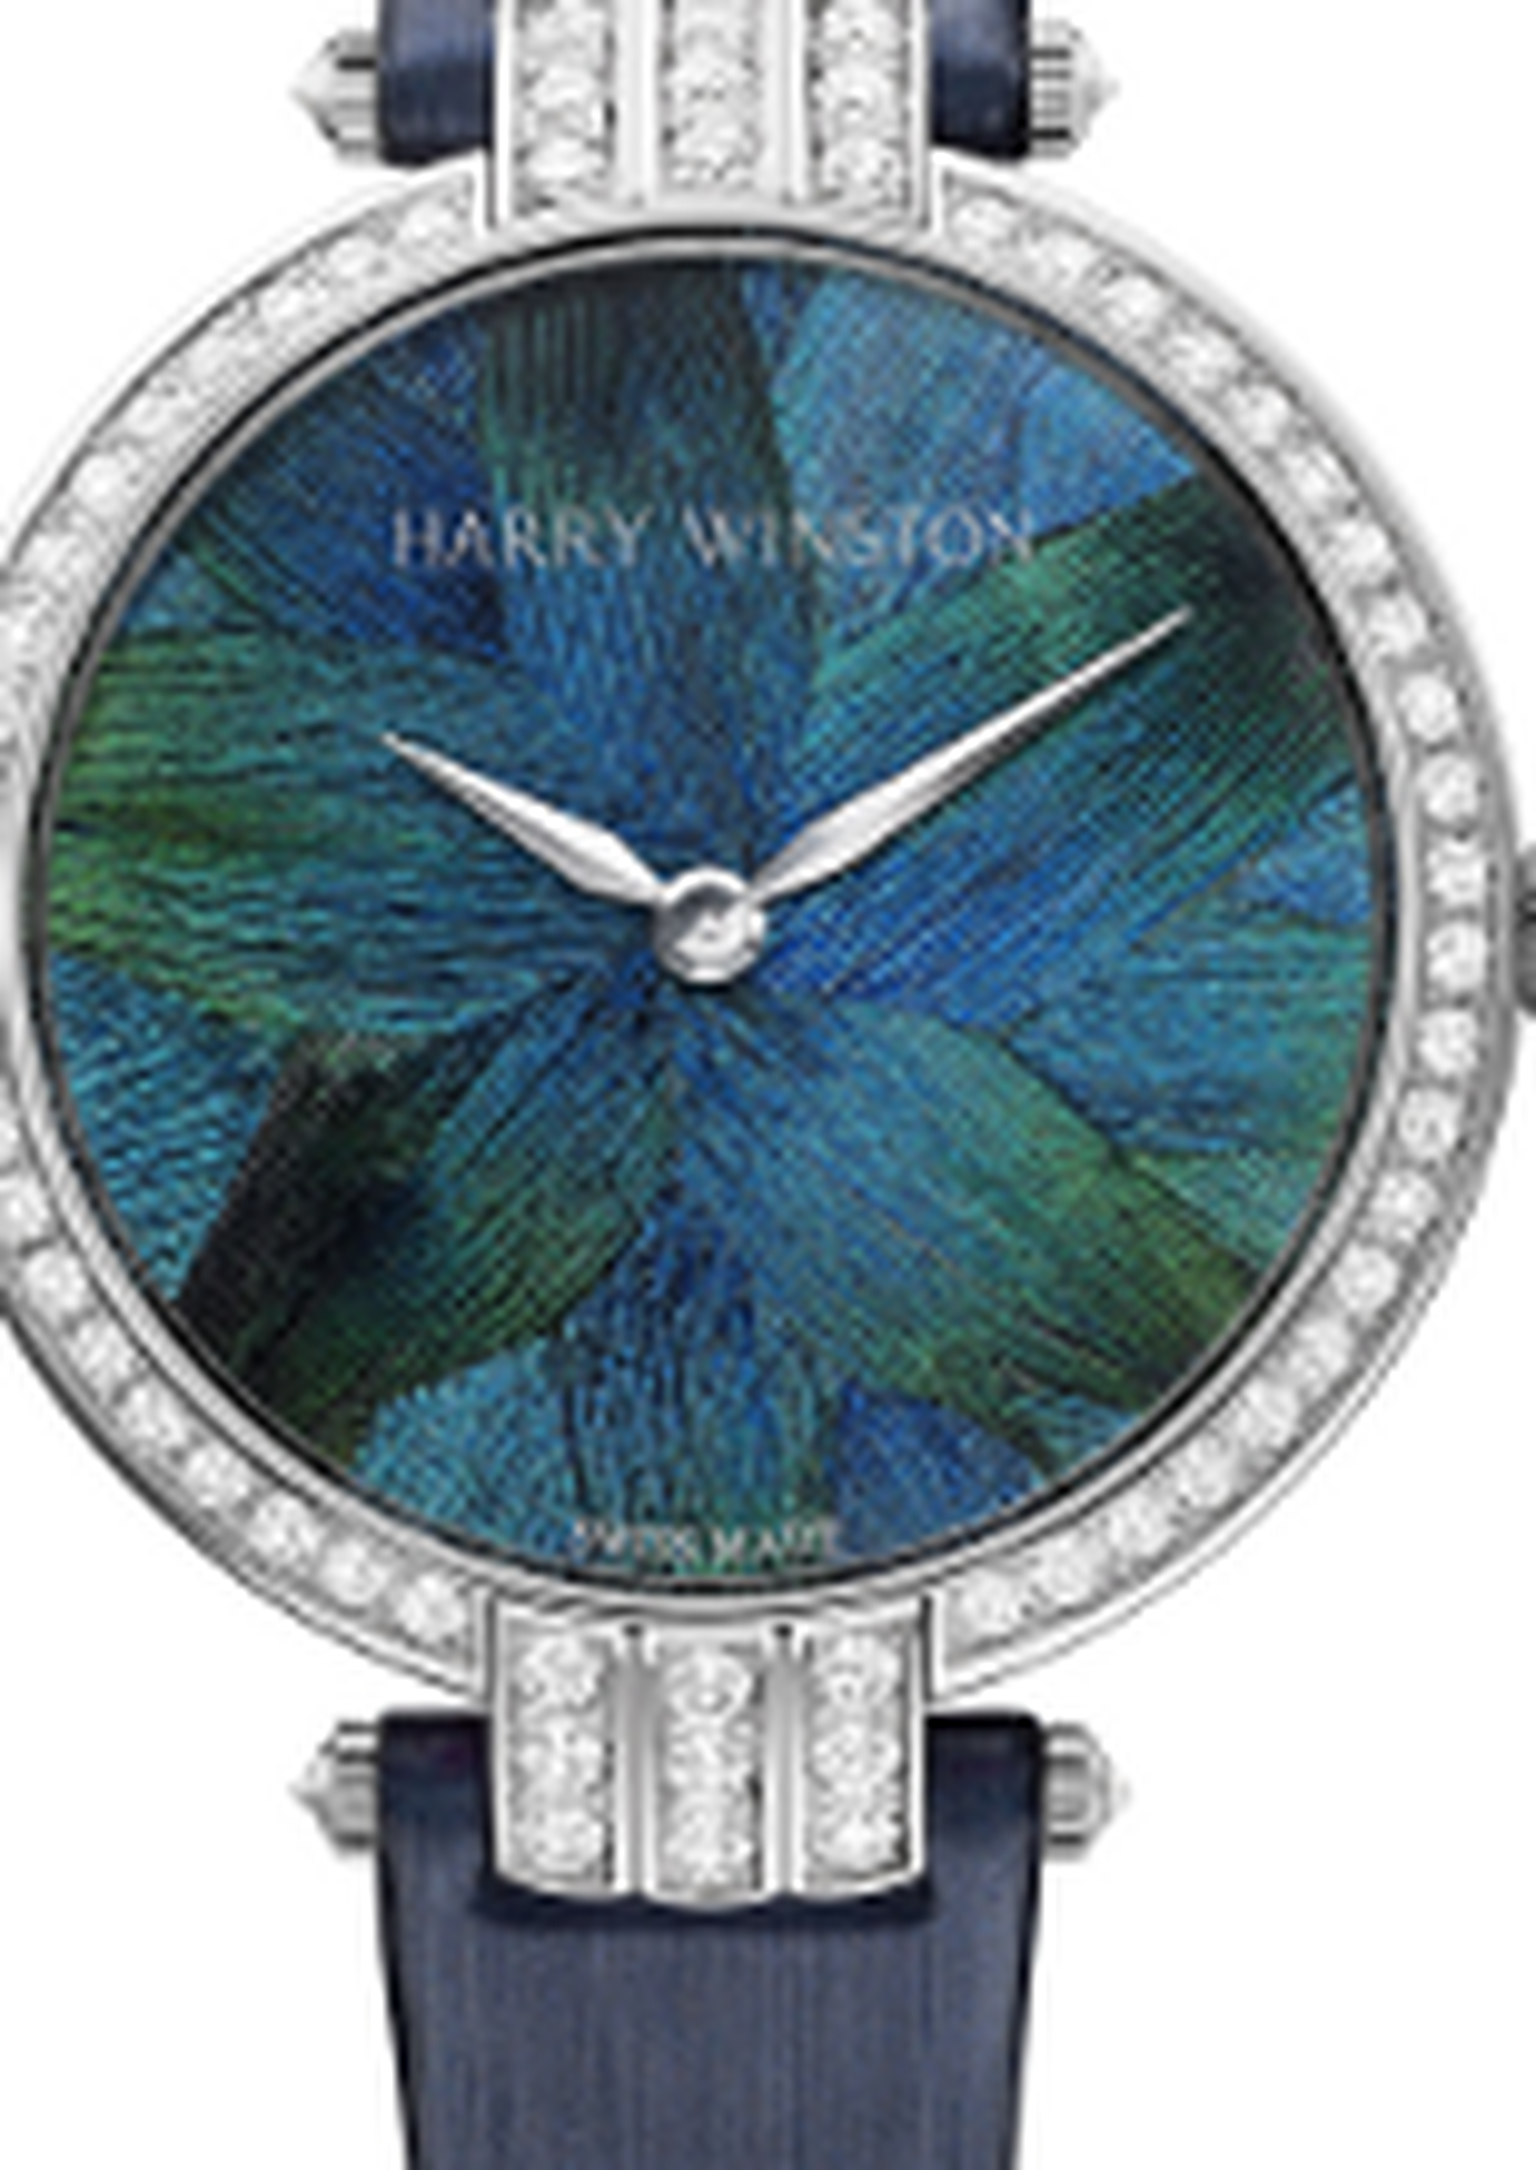 Harry Winston - premium feather watch baselword 2012 home